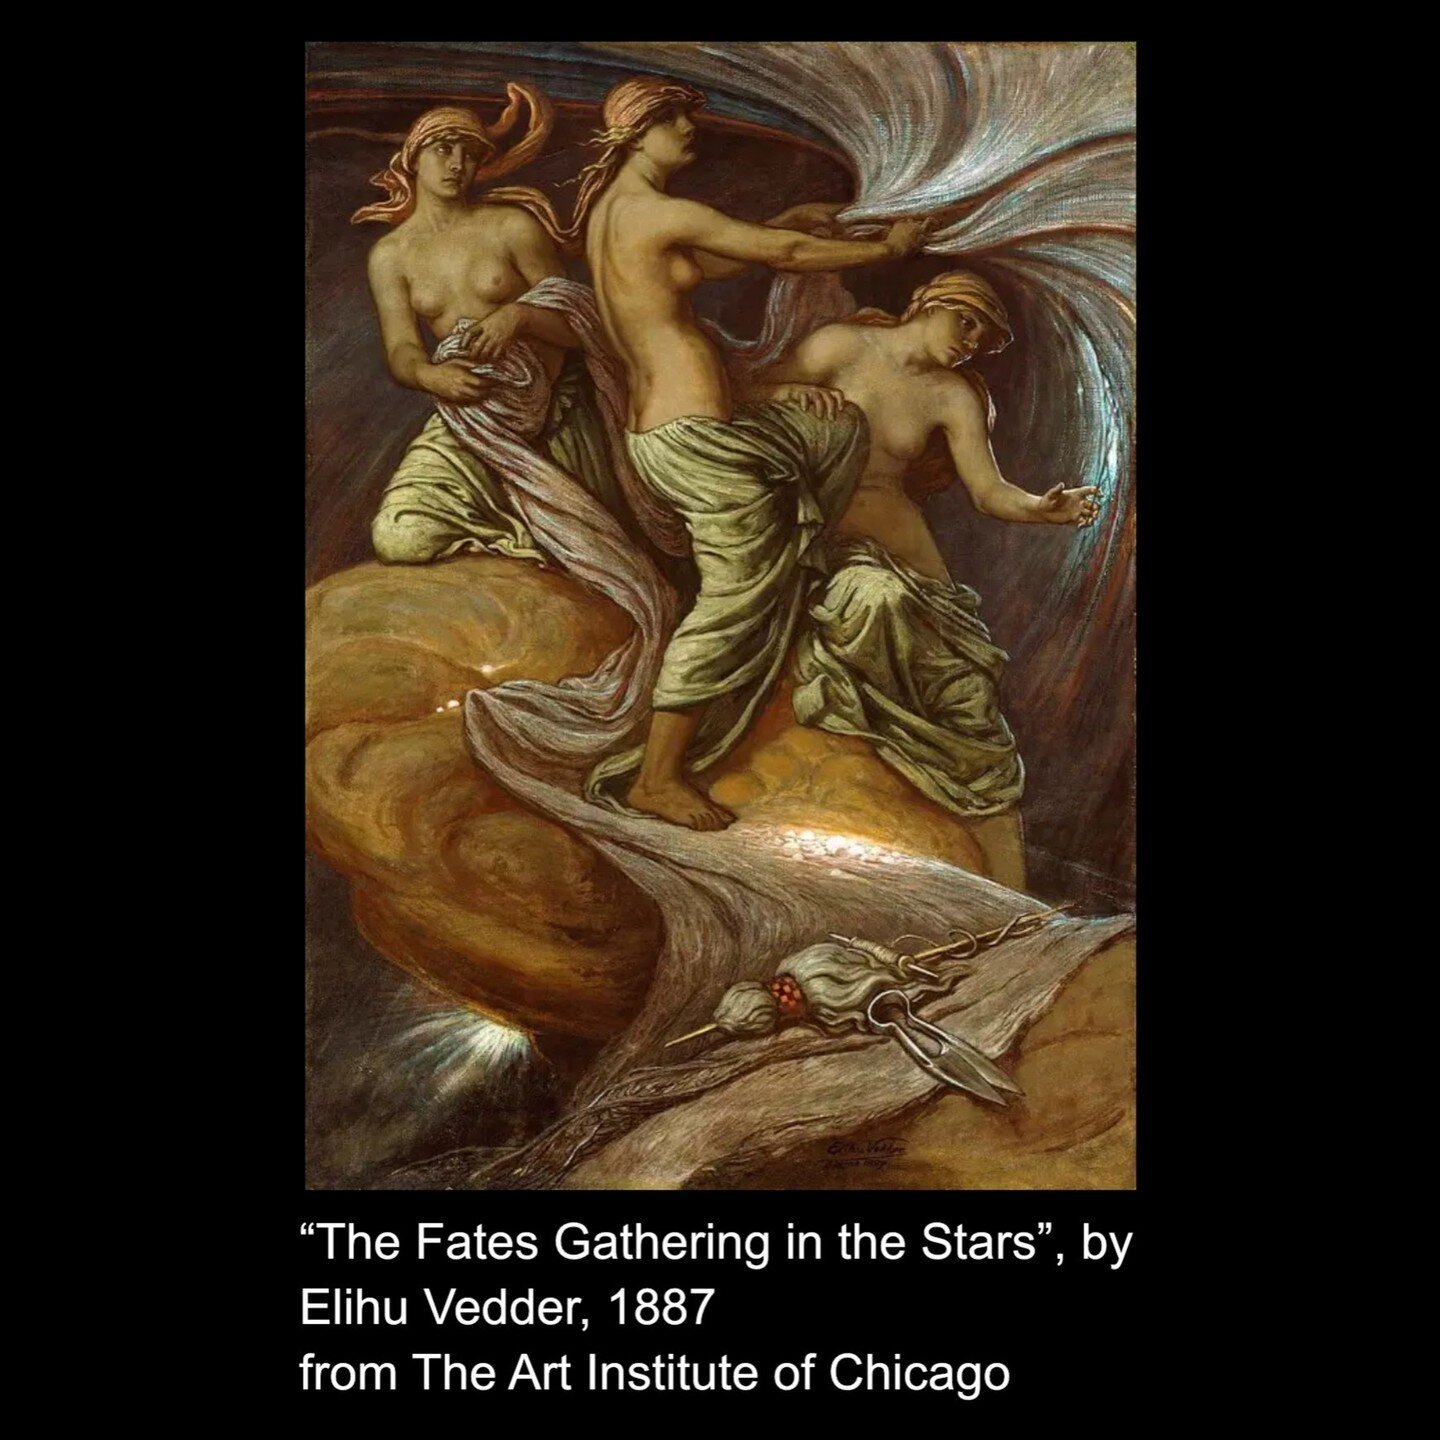 A painting from this week's &quot;Ep. 122 - The Greek Fates - Scissor Sisters.&quot; ⁠
⁠
&quot;The Fates Gathering in the Stars&quot; by Eliu Vedder, 1887 from the Art Institute of Chicago